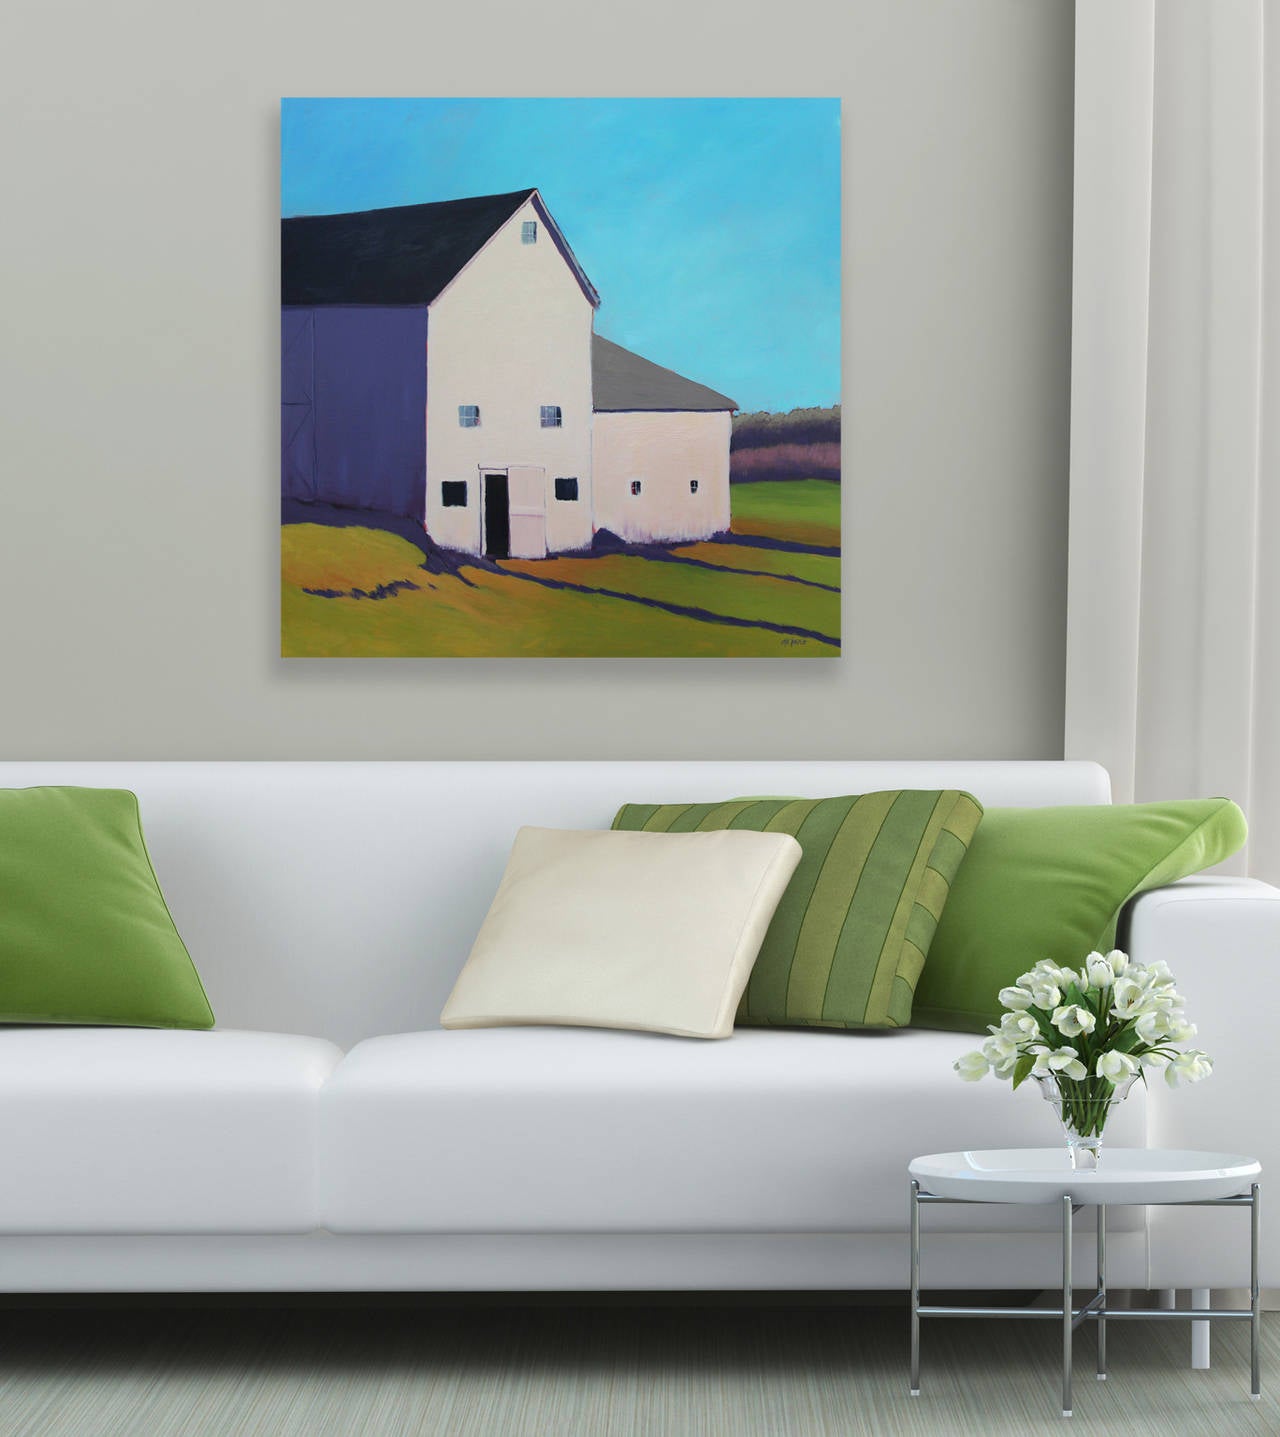 Eye-catching summer composition - cream white barn in a lush green field hiding in purple shadows beneath a bright blue sky.

Carol C. Young is landscape painter working in acrylics and oils. She is a plein air painter as well as a studio artist